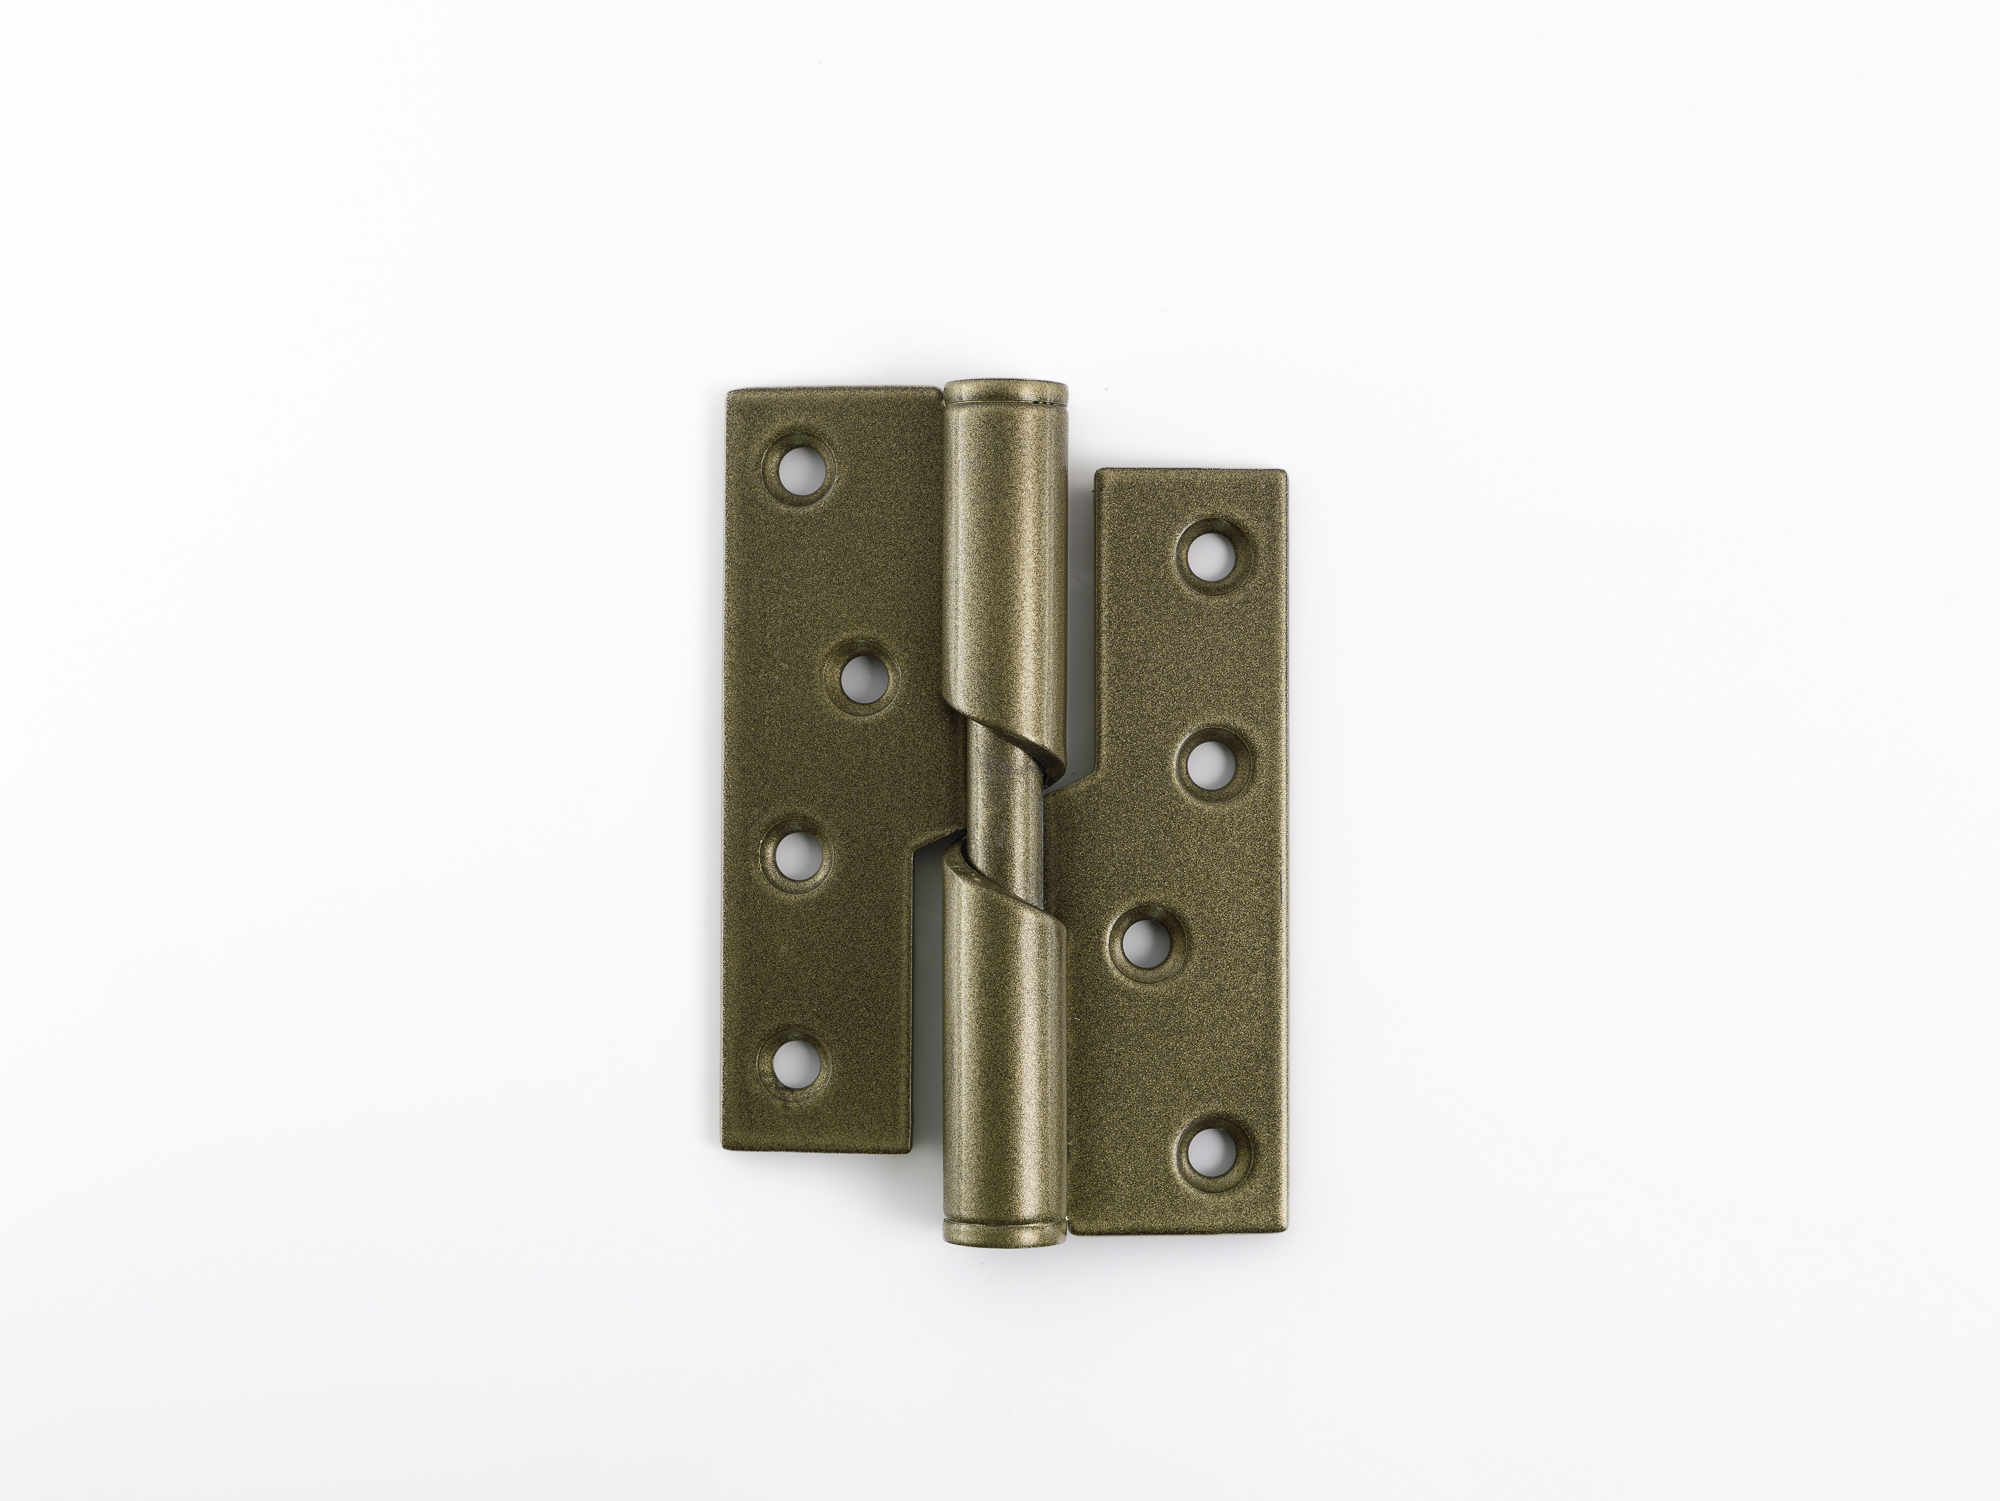 Rising Butt Hinges - 102 x 76mm - Antique Brass Finish - Pack of 2 - Handed